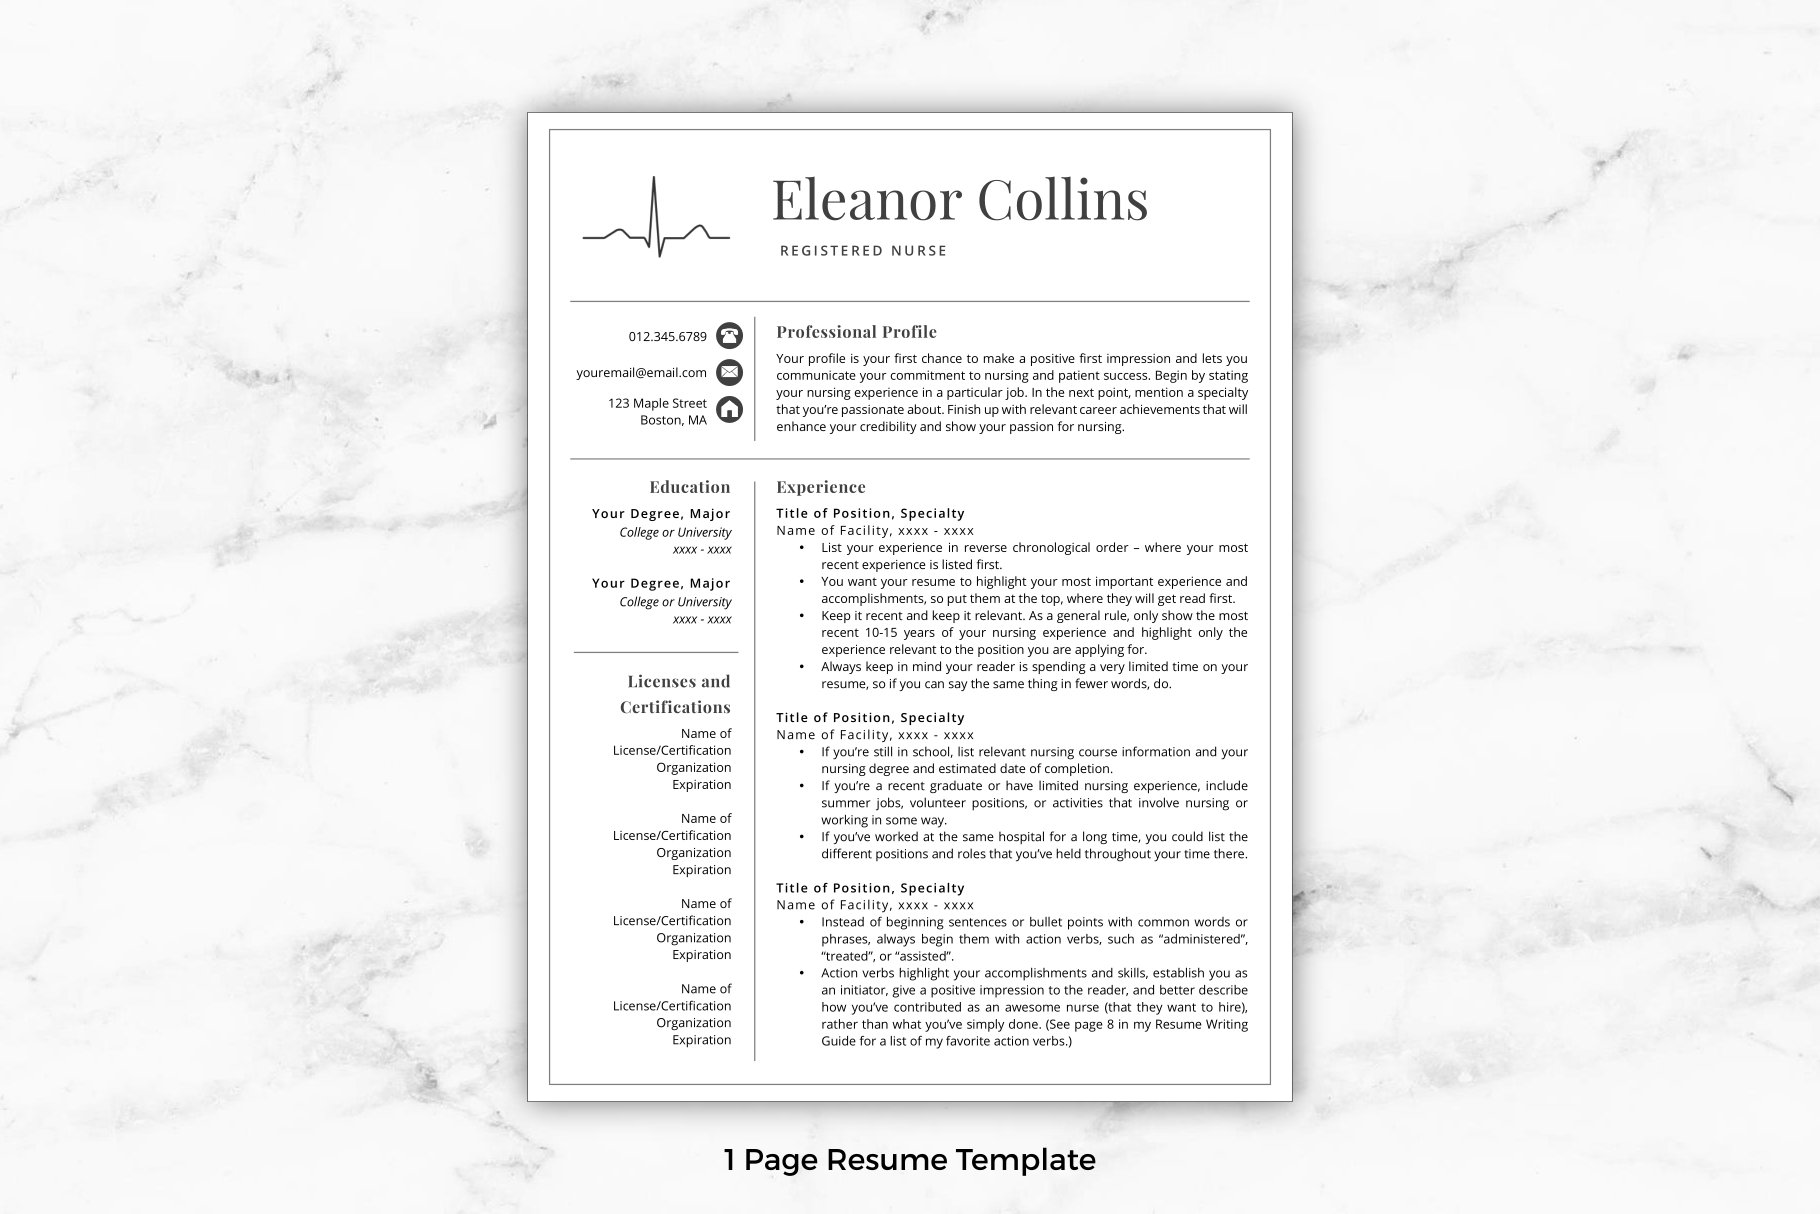 Resume template for a medical professional.